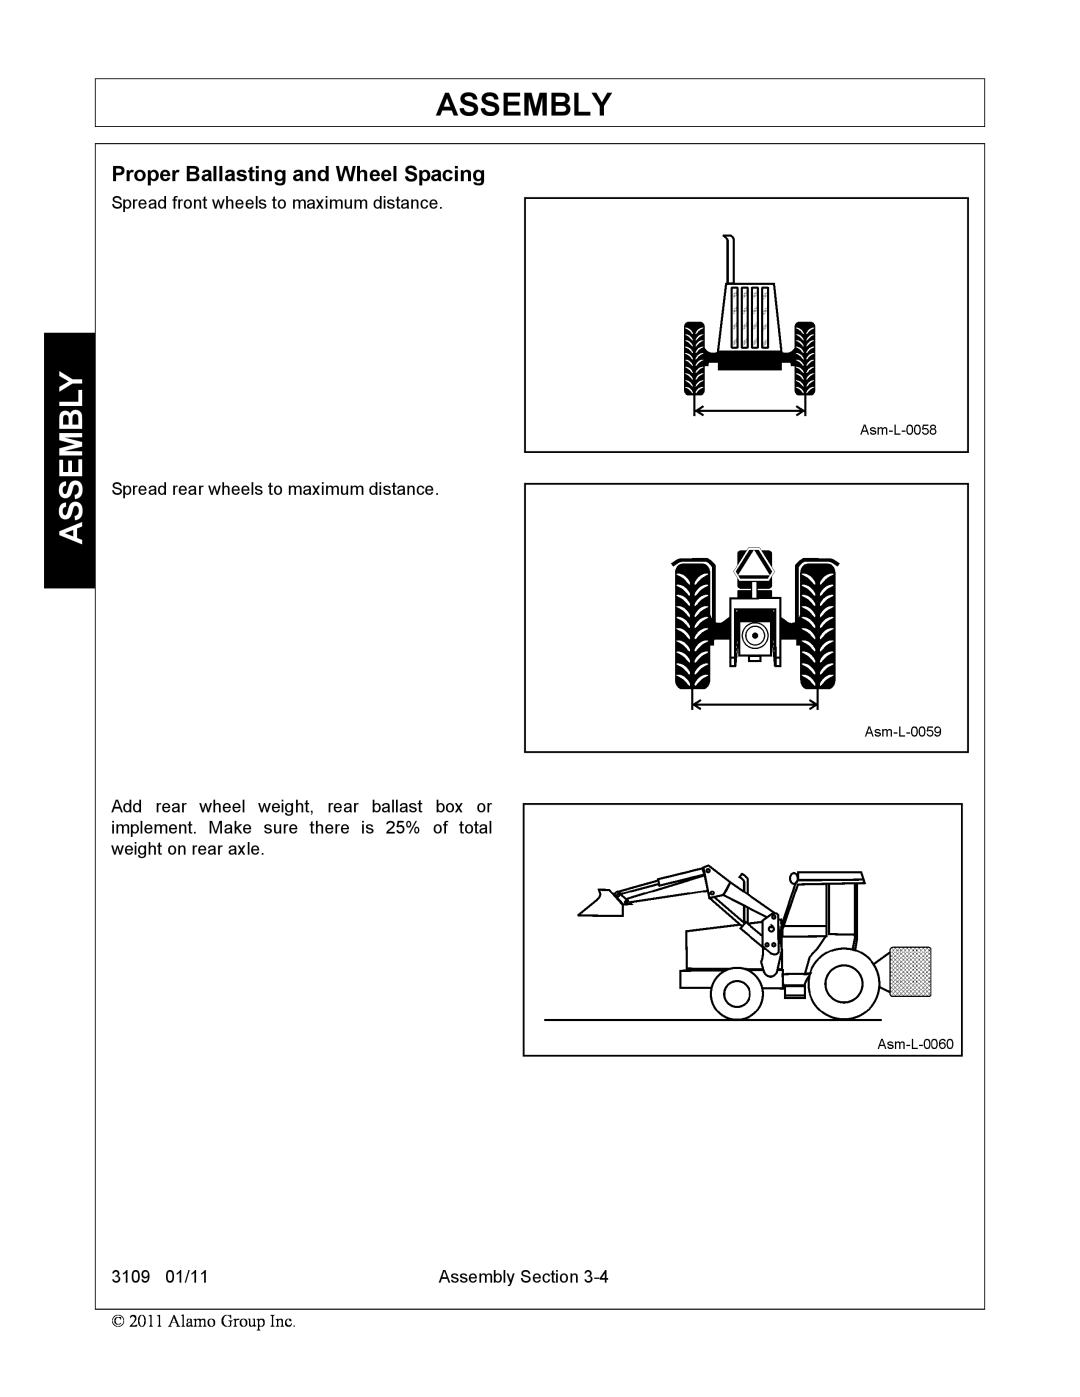 Alamo manual Assembly, Proper Ballasting and Wheel Spacing, Spread front wheels to maximum distance, 3109 01/11 